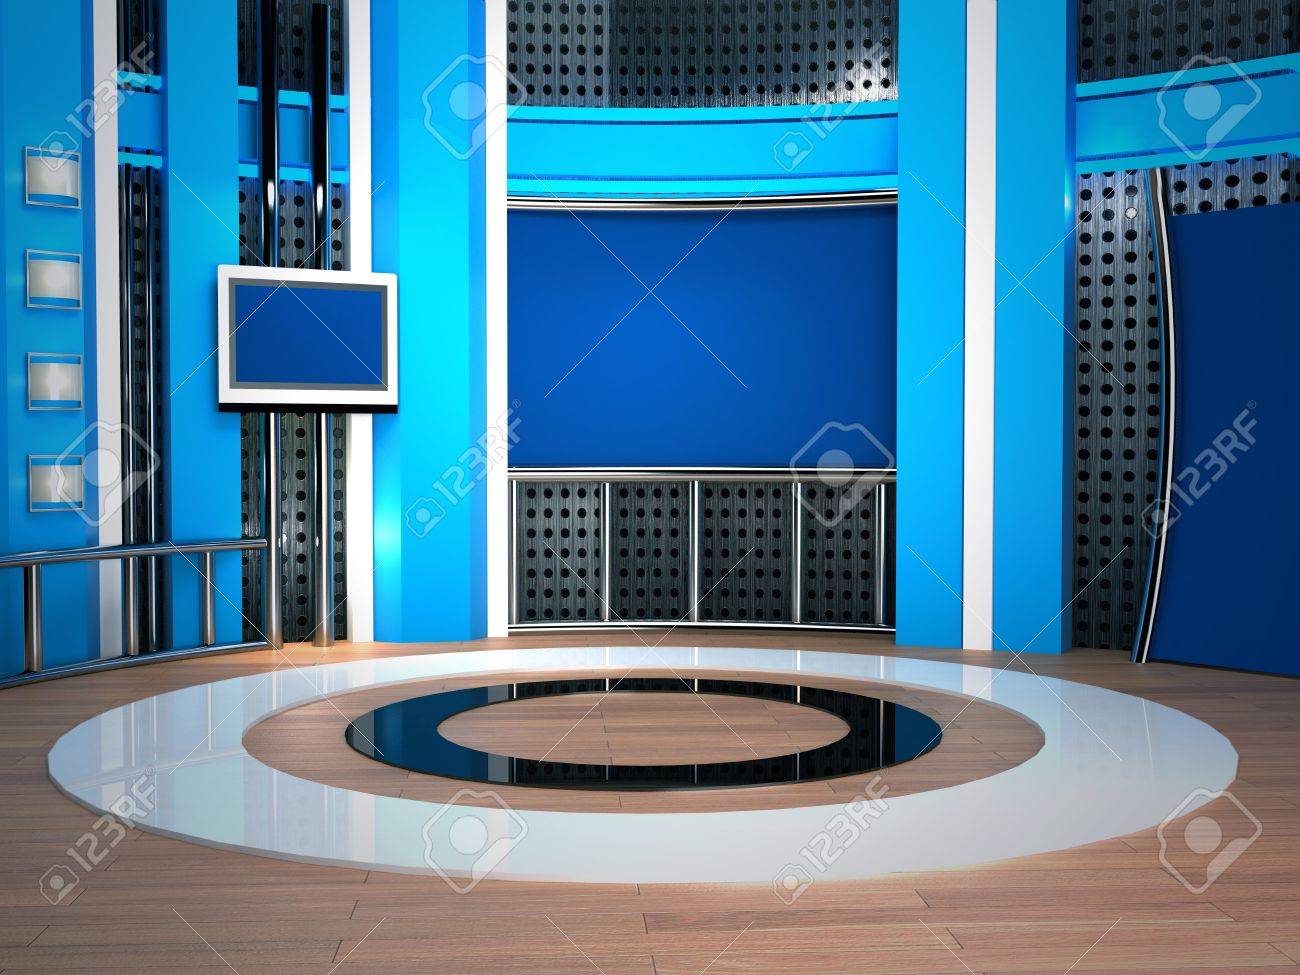 Background Studio For Tv Chroma Stock Photo Picture And Royalty